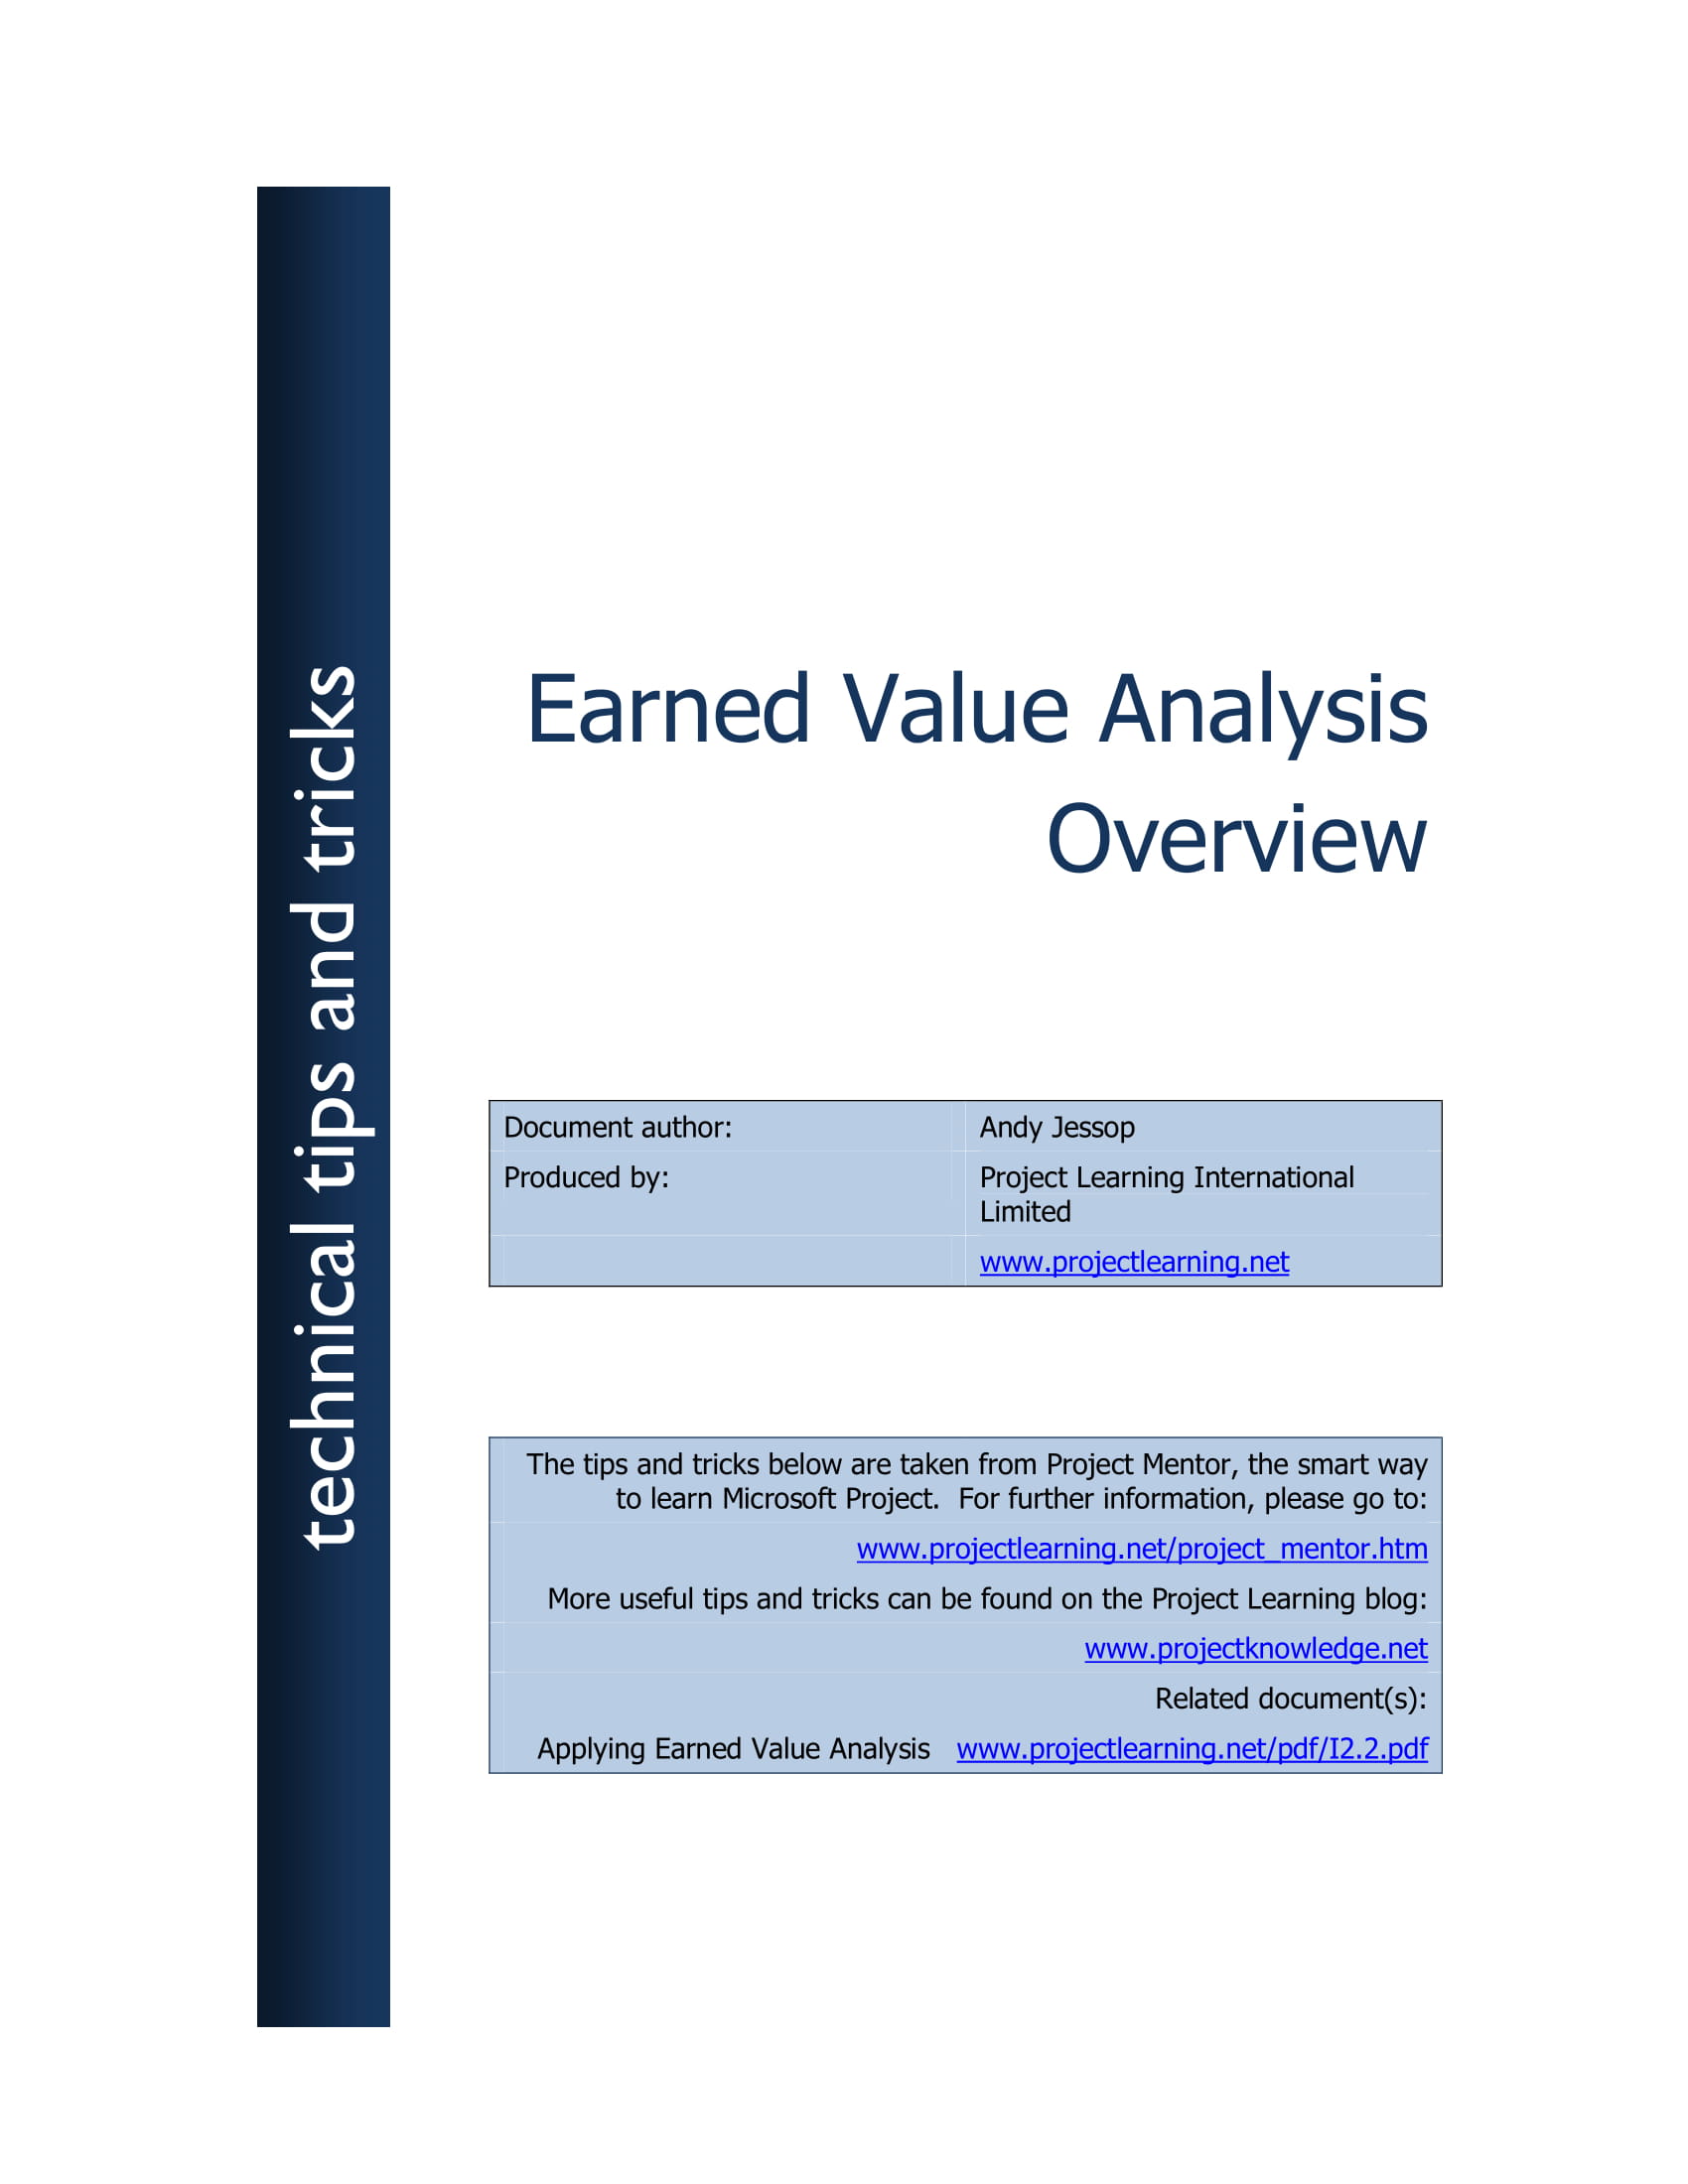 earned value analysis overview example 01